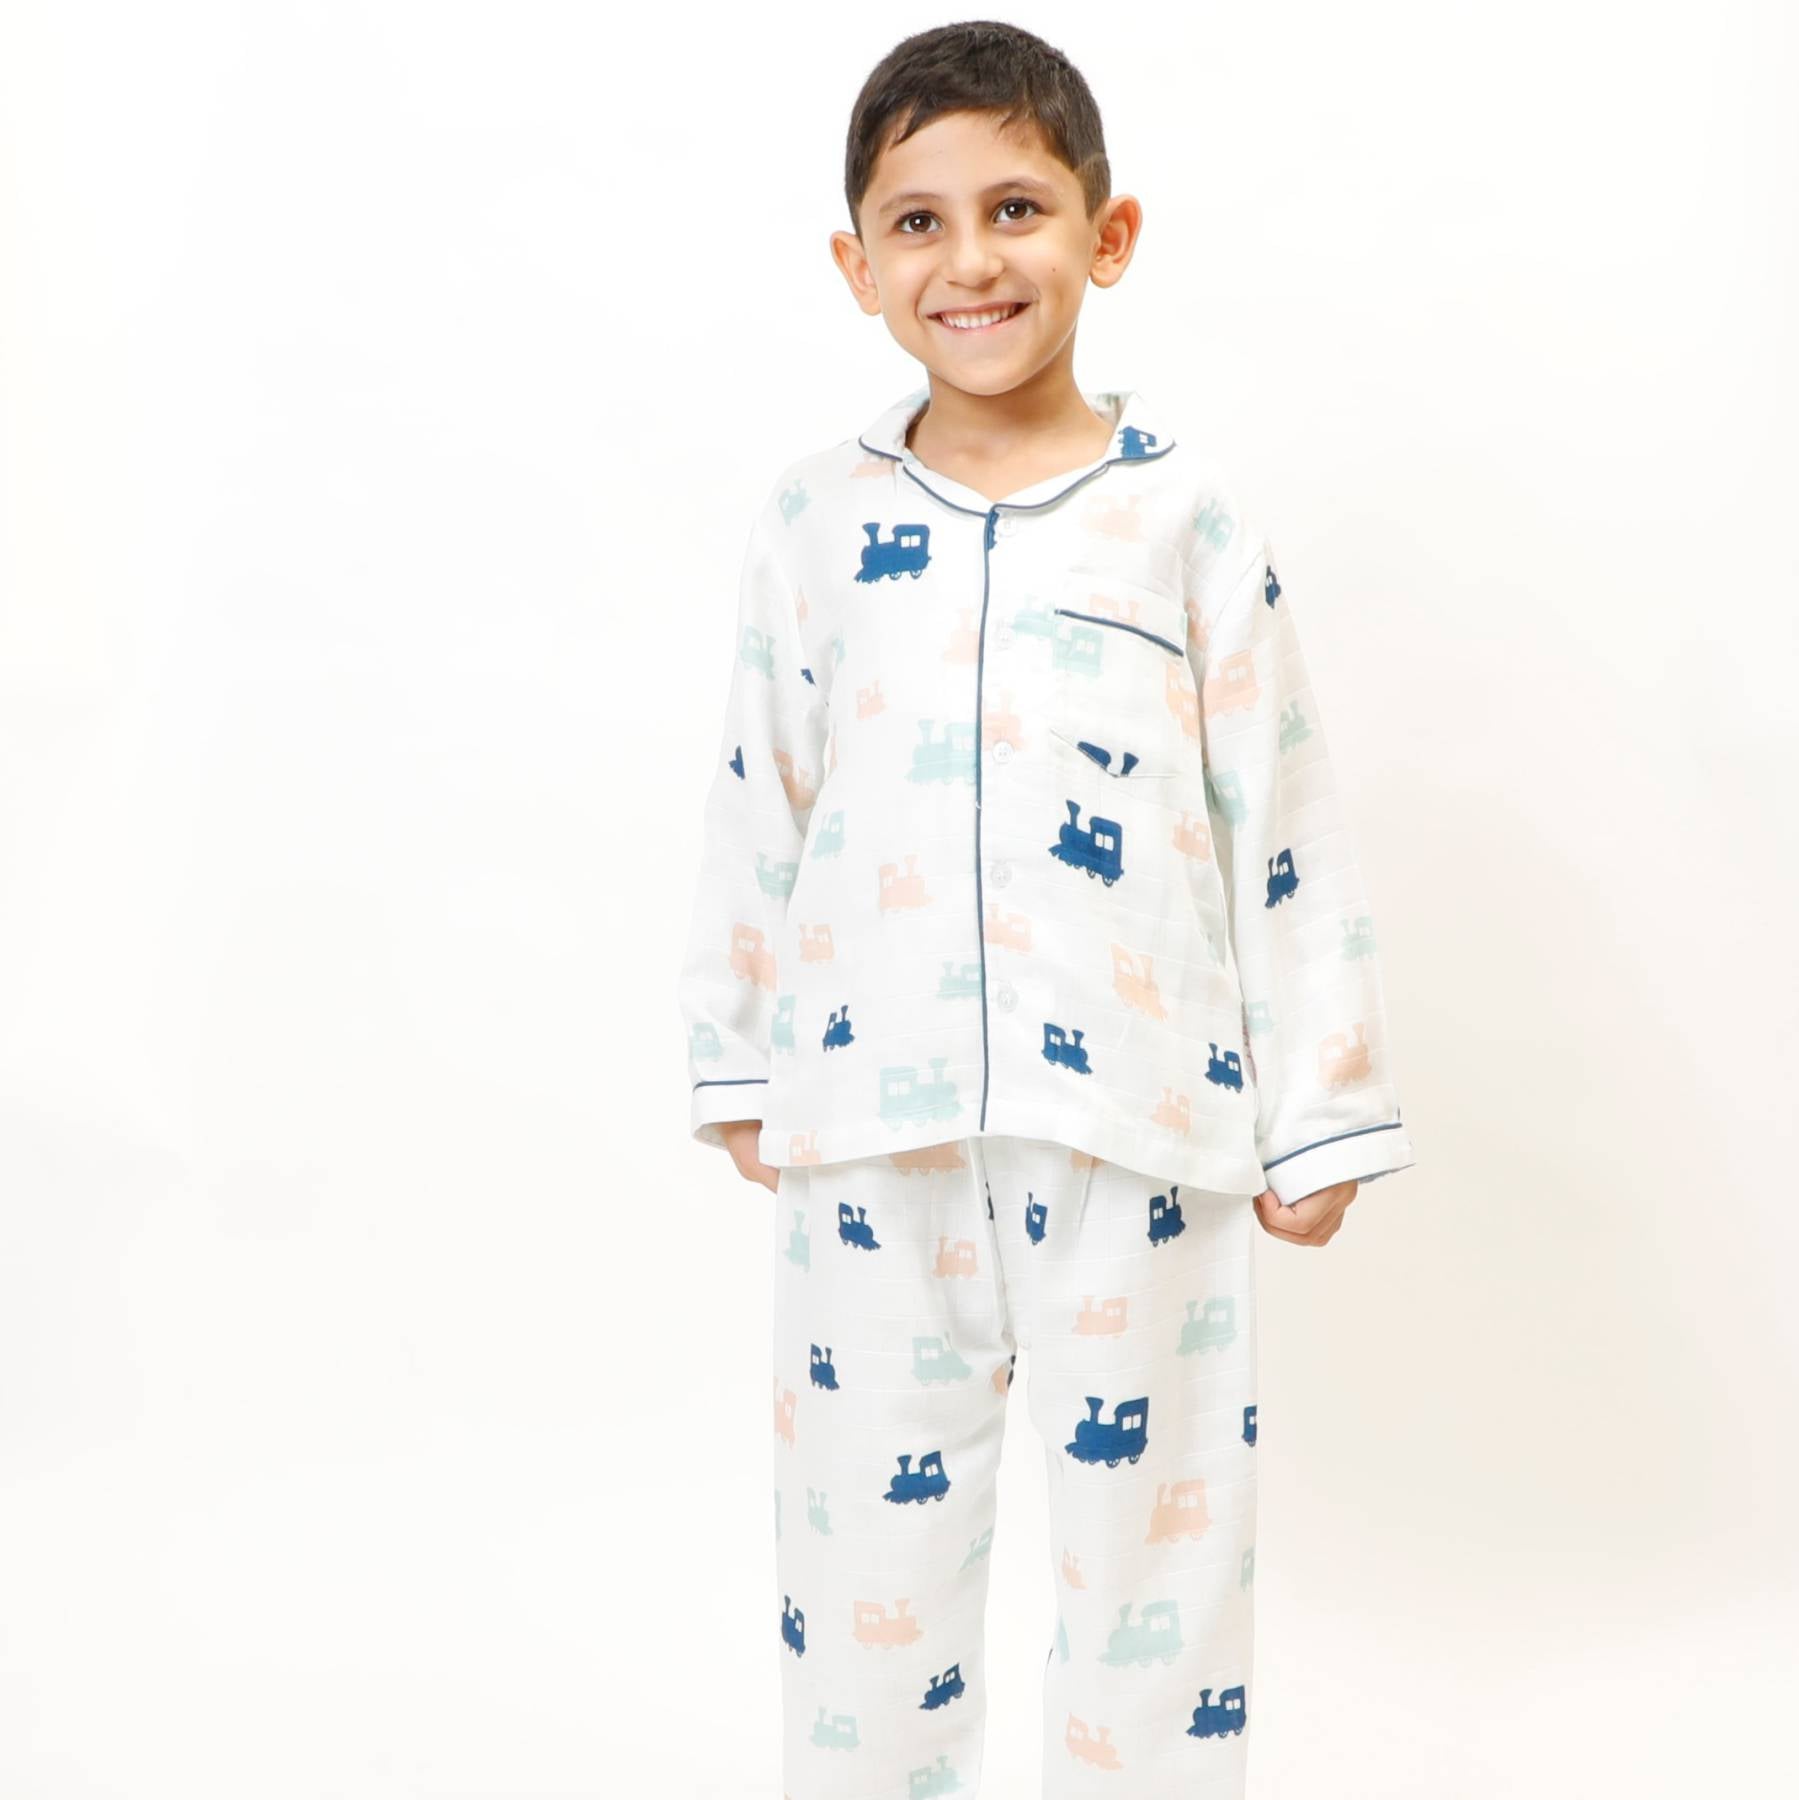 Ollie the Train (White) - Bamboo Muslin Night Suit Set